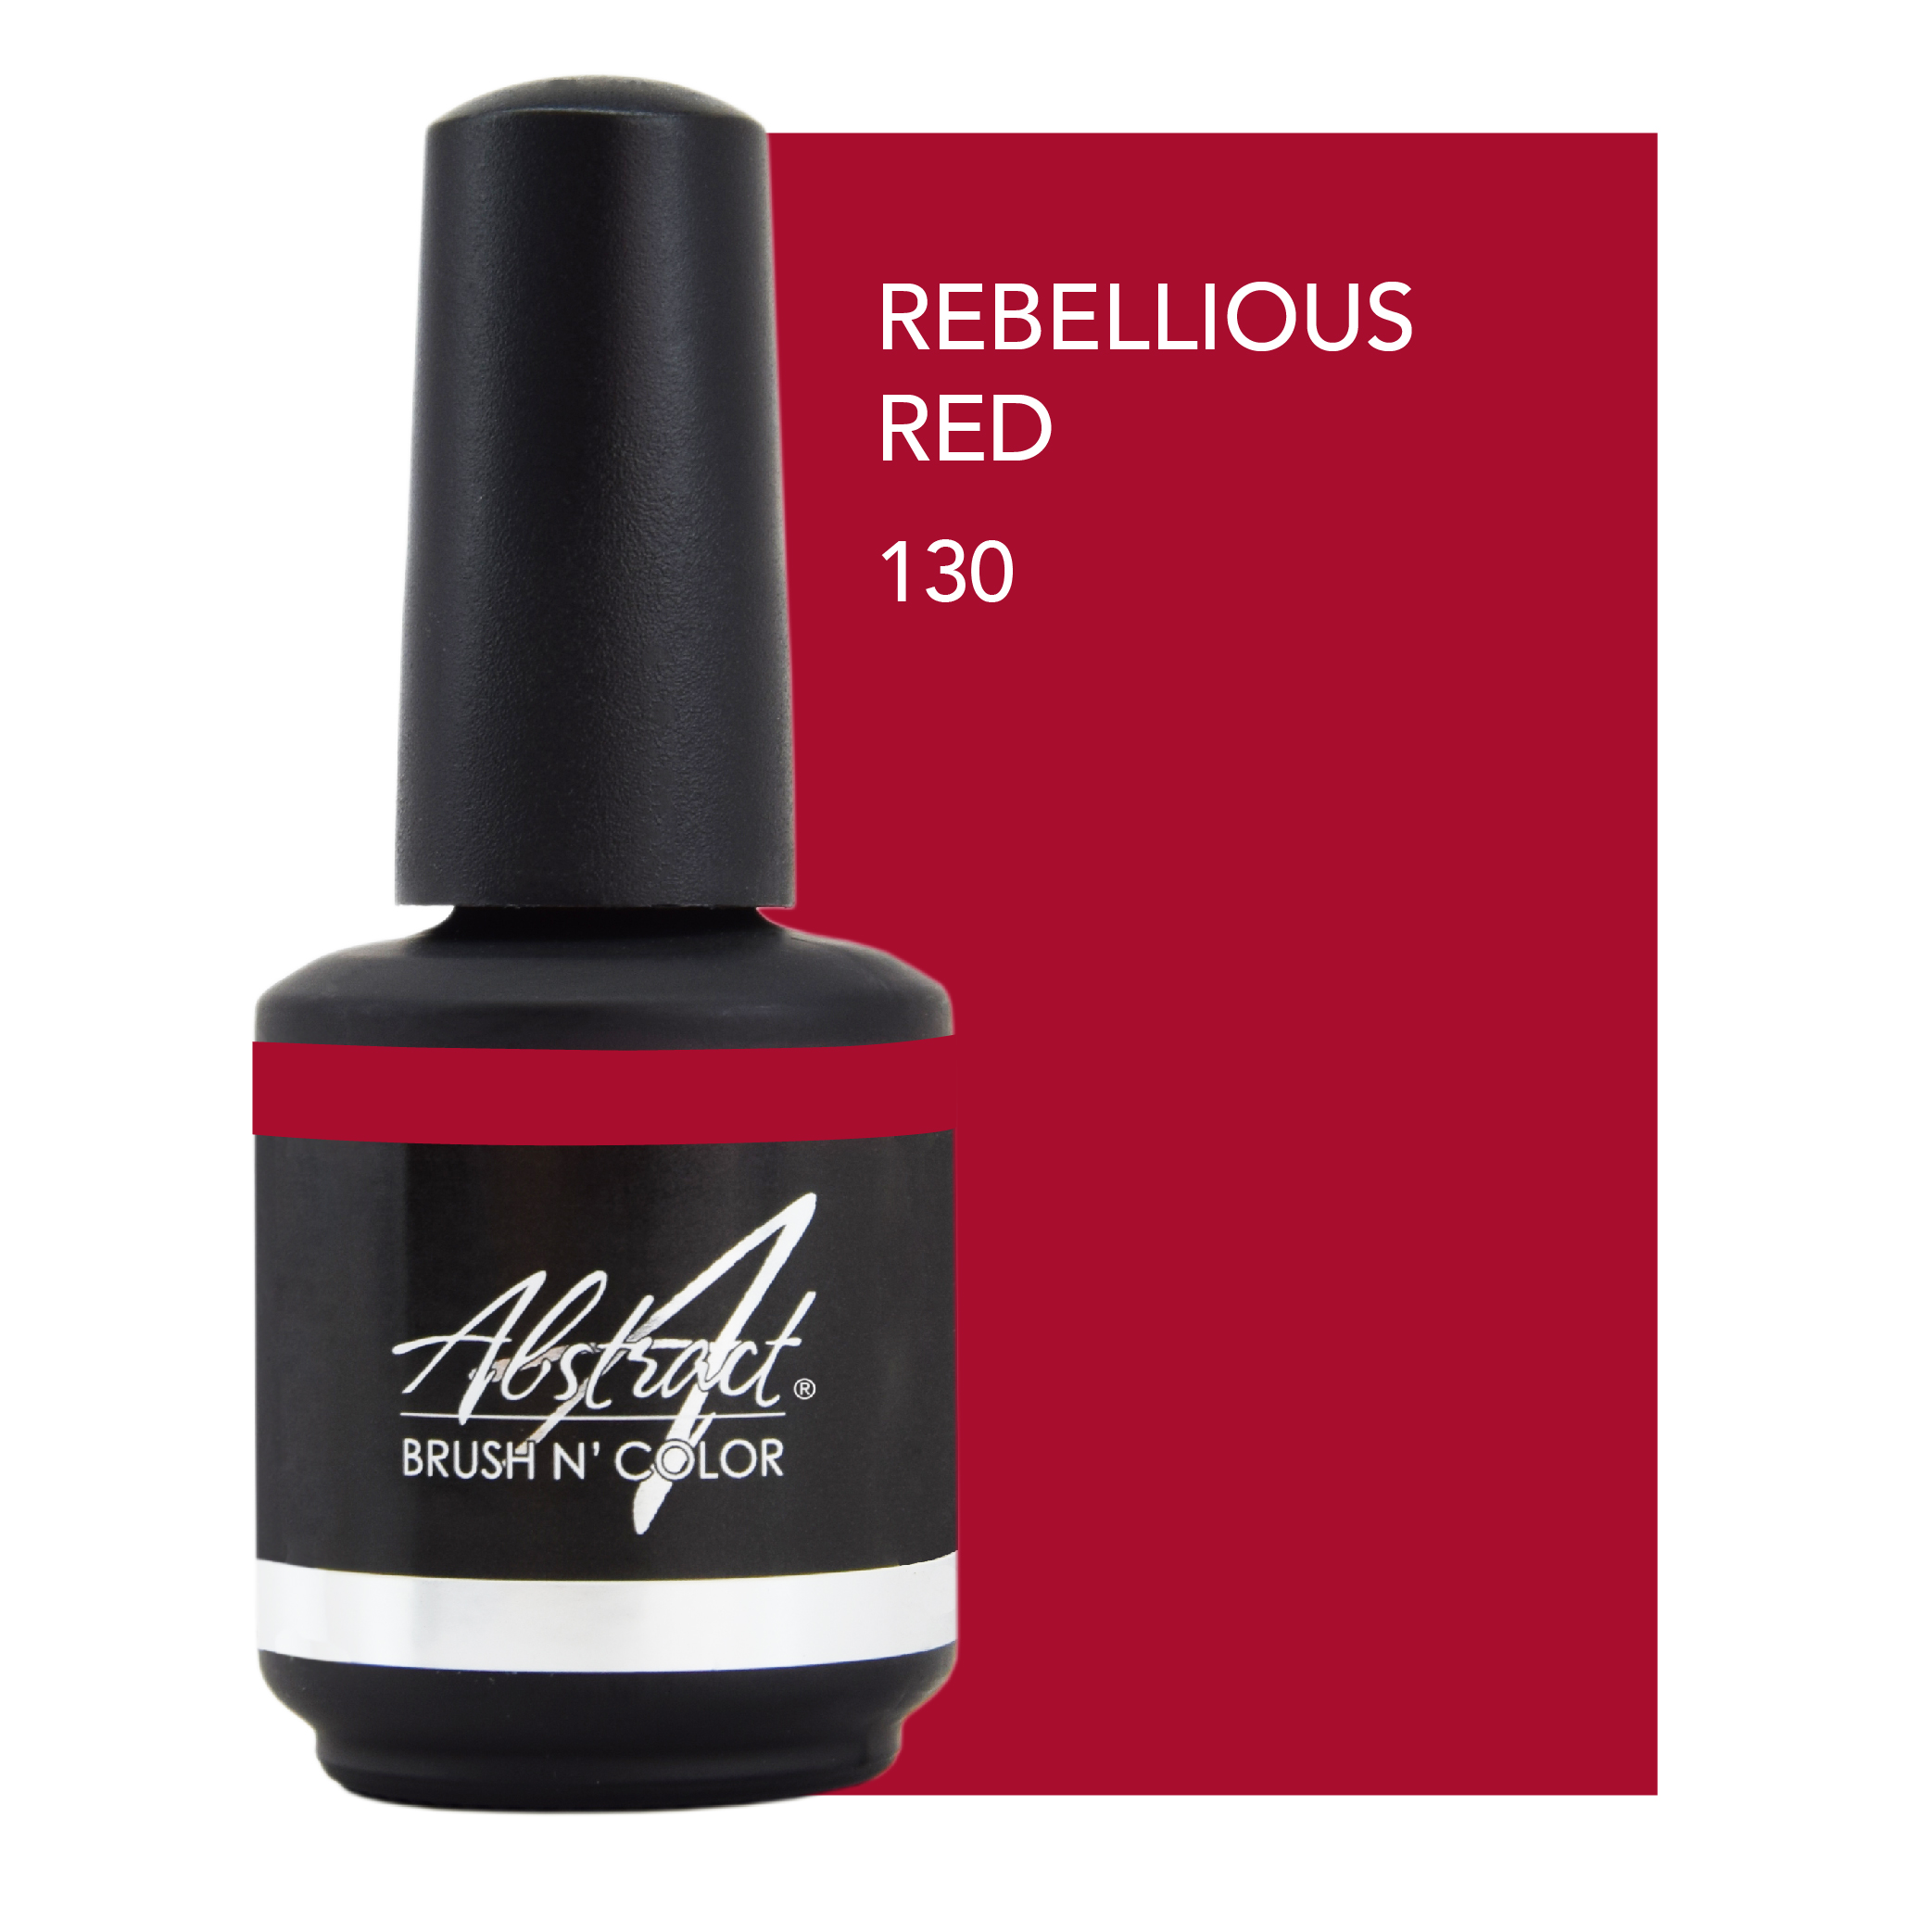 130* Rebellious Red15ml (Dress Up), Abstract | 210574